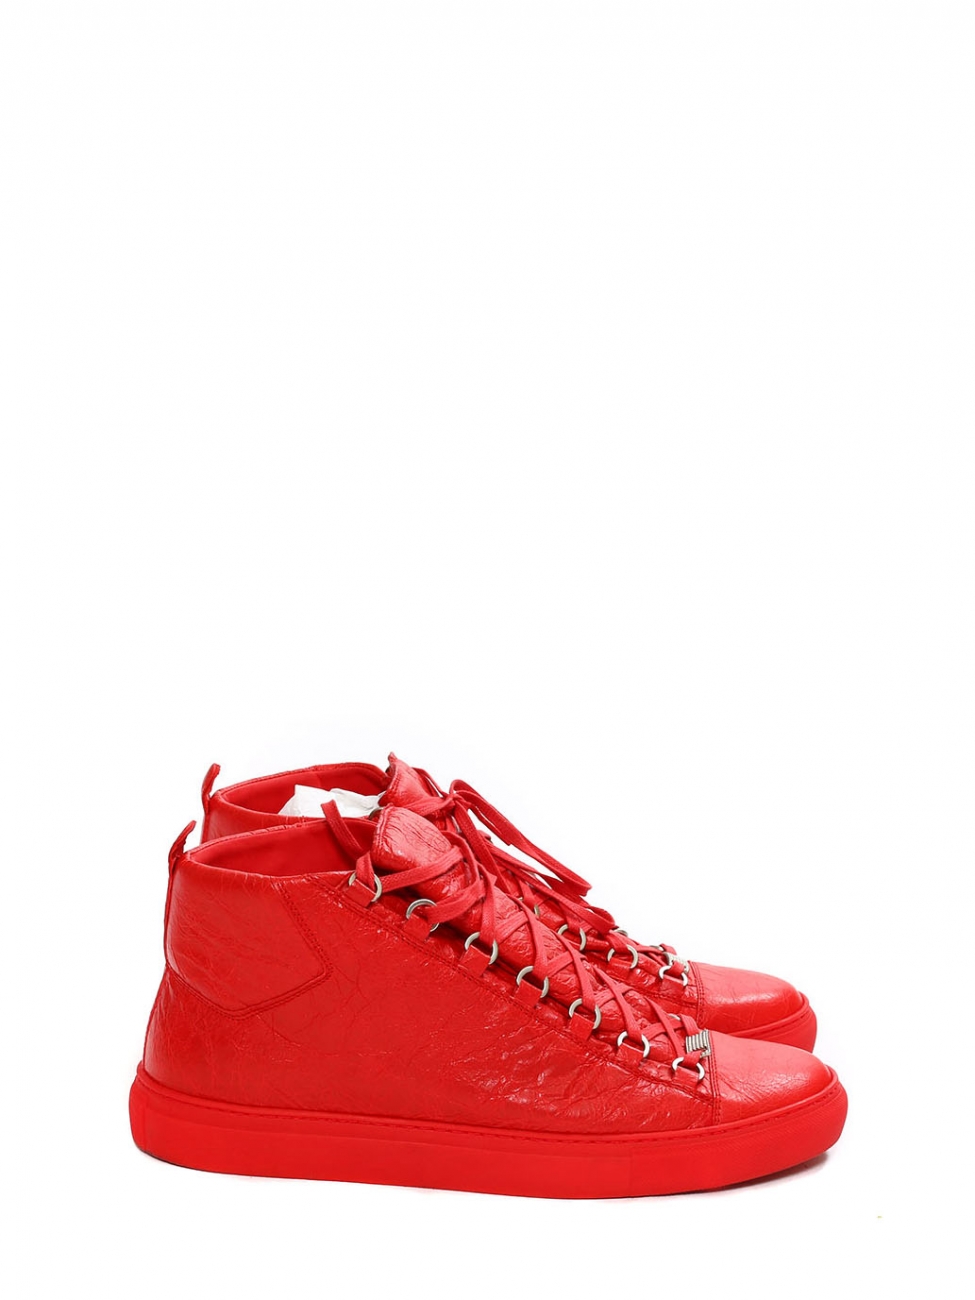 Buy Red And Grey Balenciaga Arena  UP TO 55 OFF